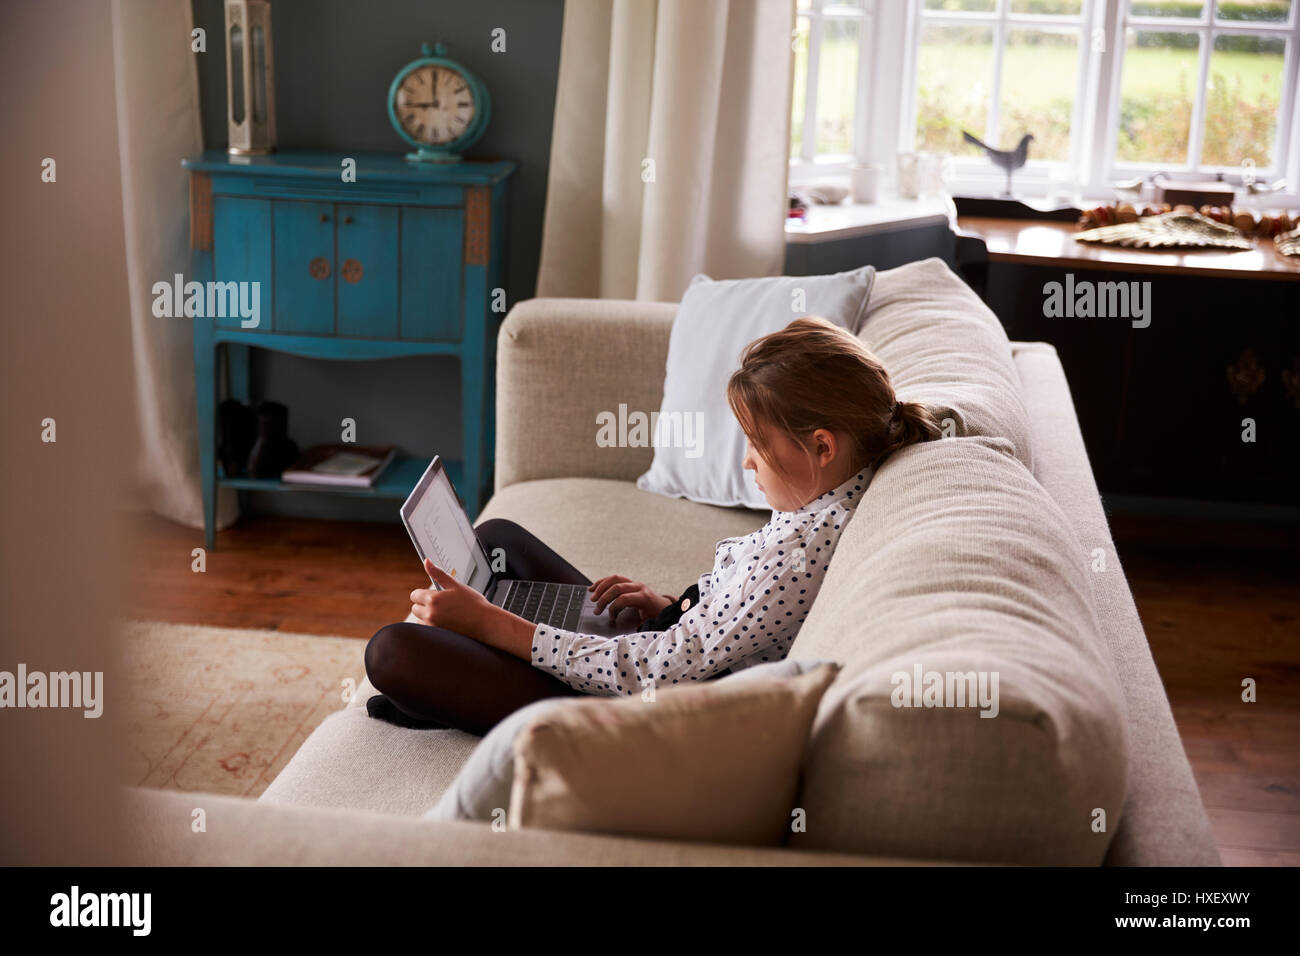 Girl Sitting On Sofa At Home Using Laptop Computer Stock Photo